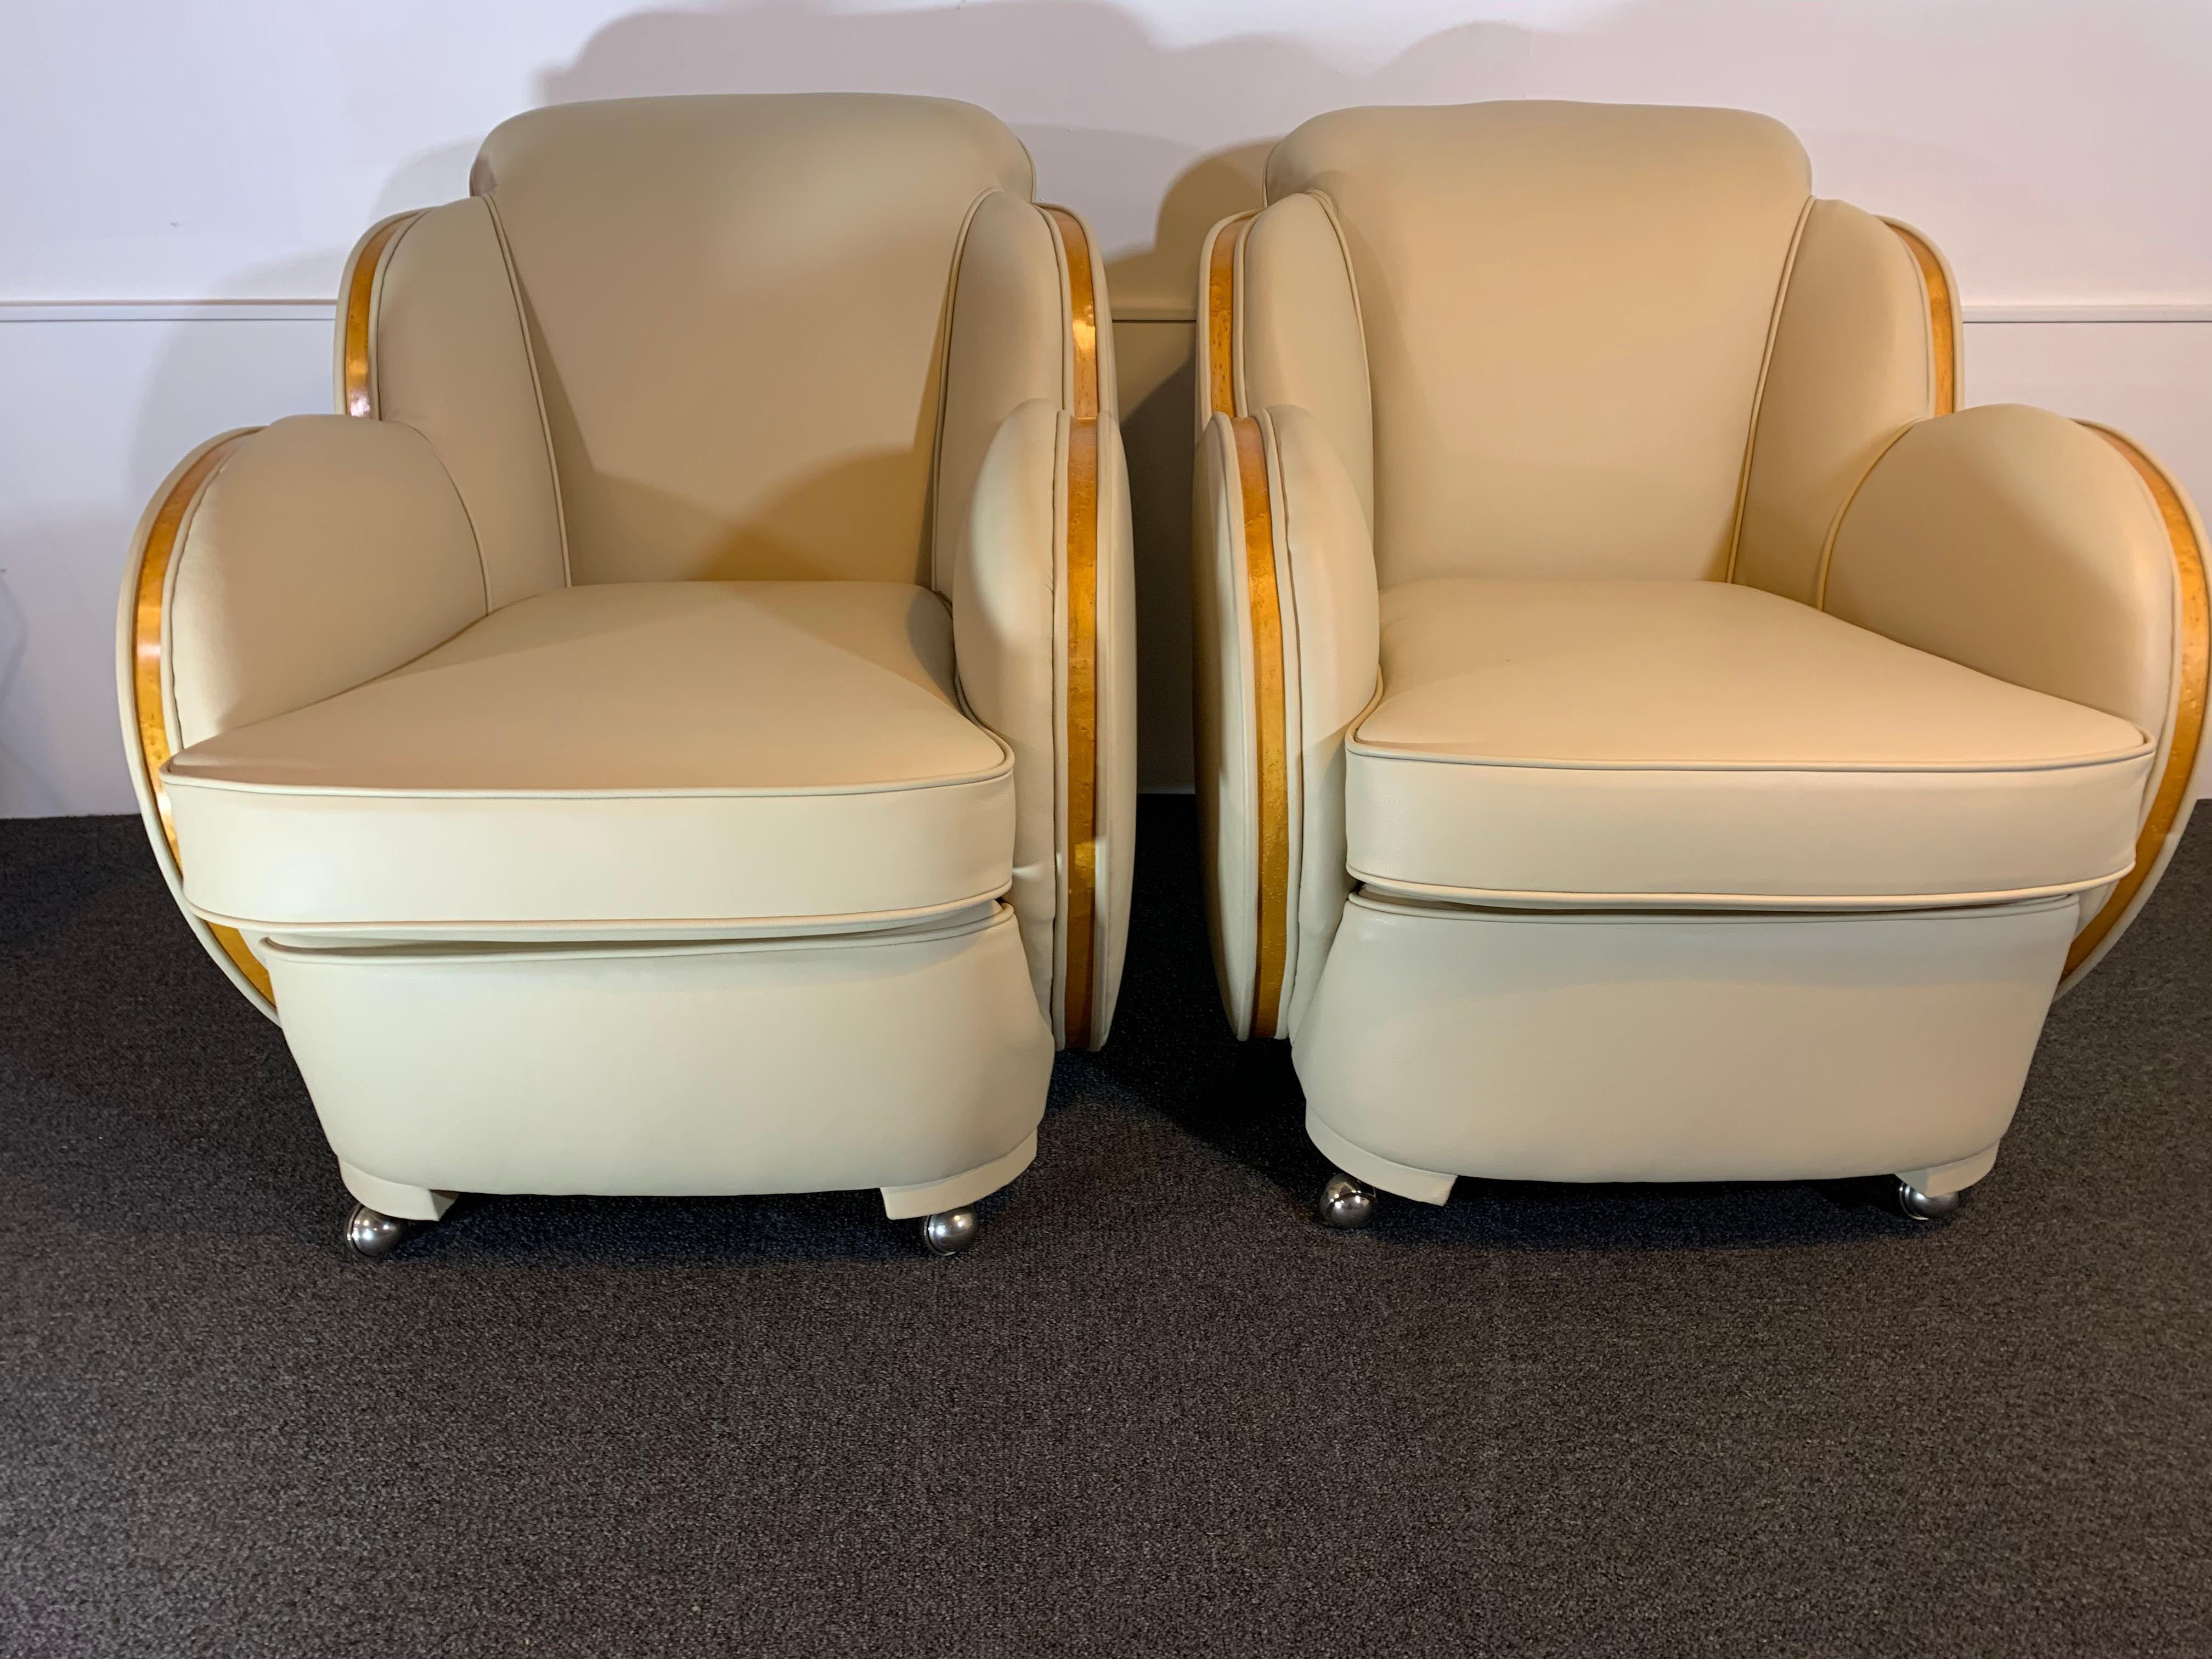 Art Deco cloud 3-seat sofa and two armchairs by Harry and Lou Epstein.
This has been reupholstered in a soft cream Italian leather and has a satinwood banding to the arms.
In showroom condition.

Dimensions:
Height 86 cm (33.9